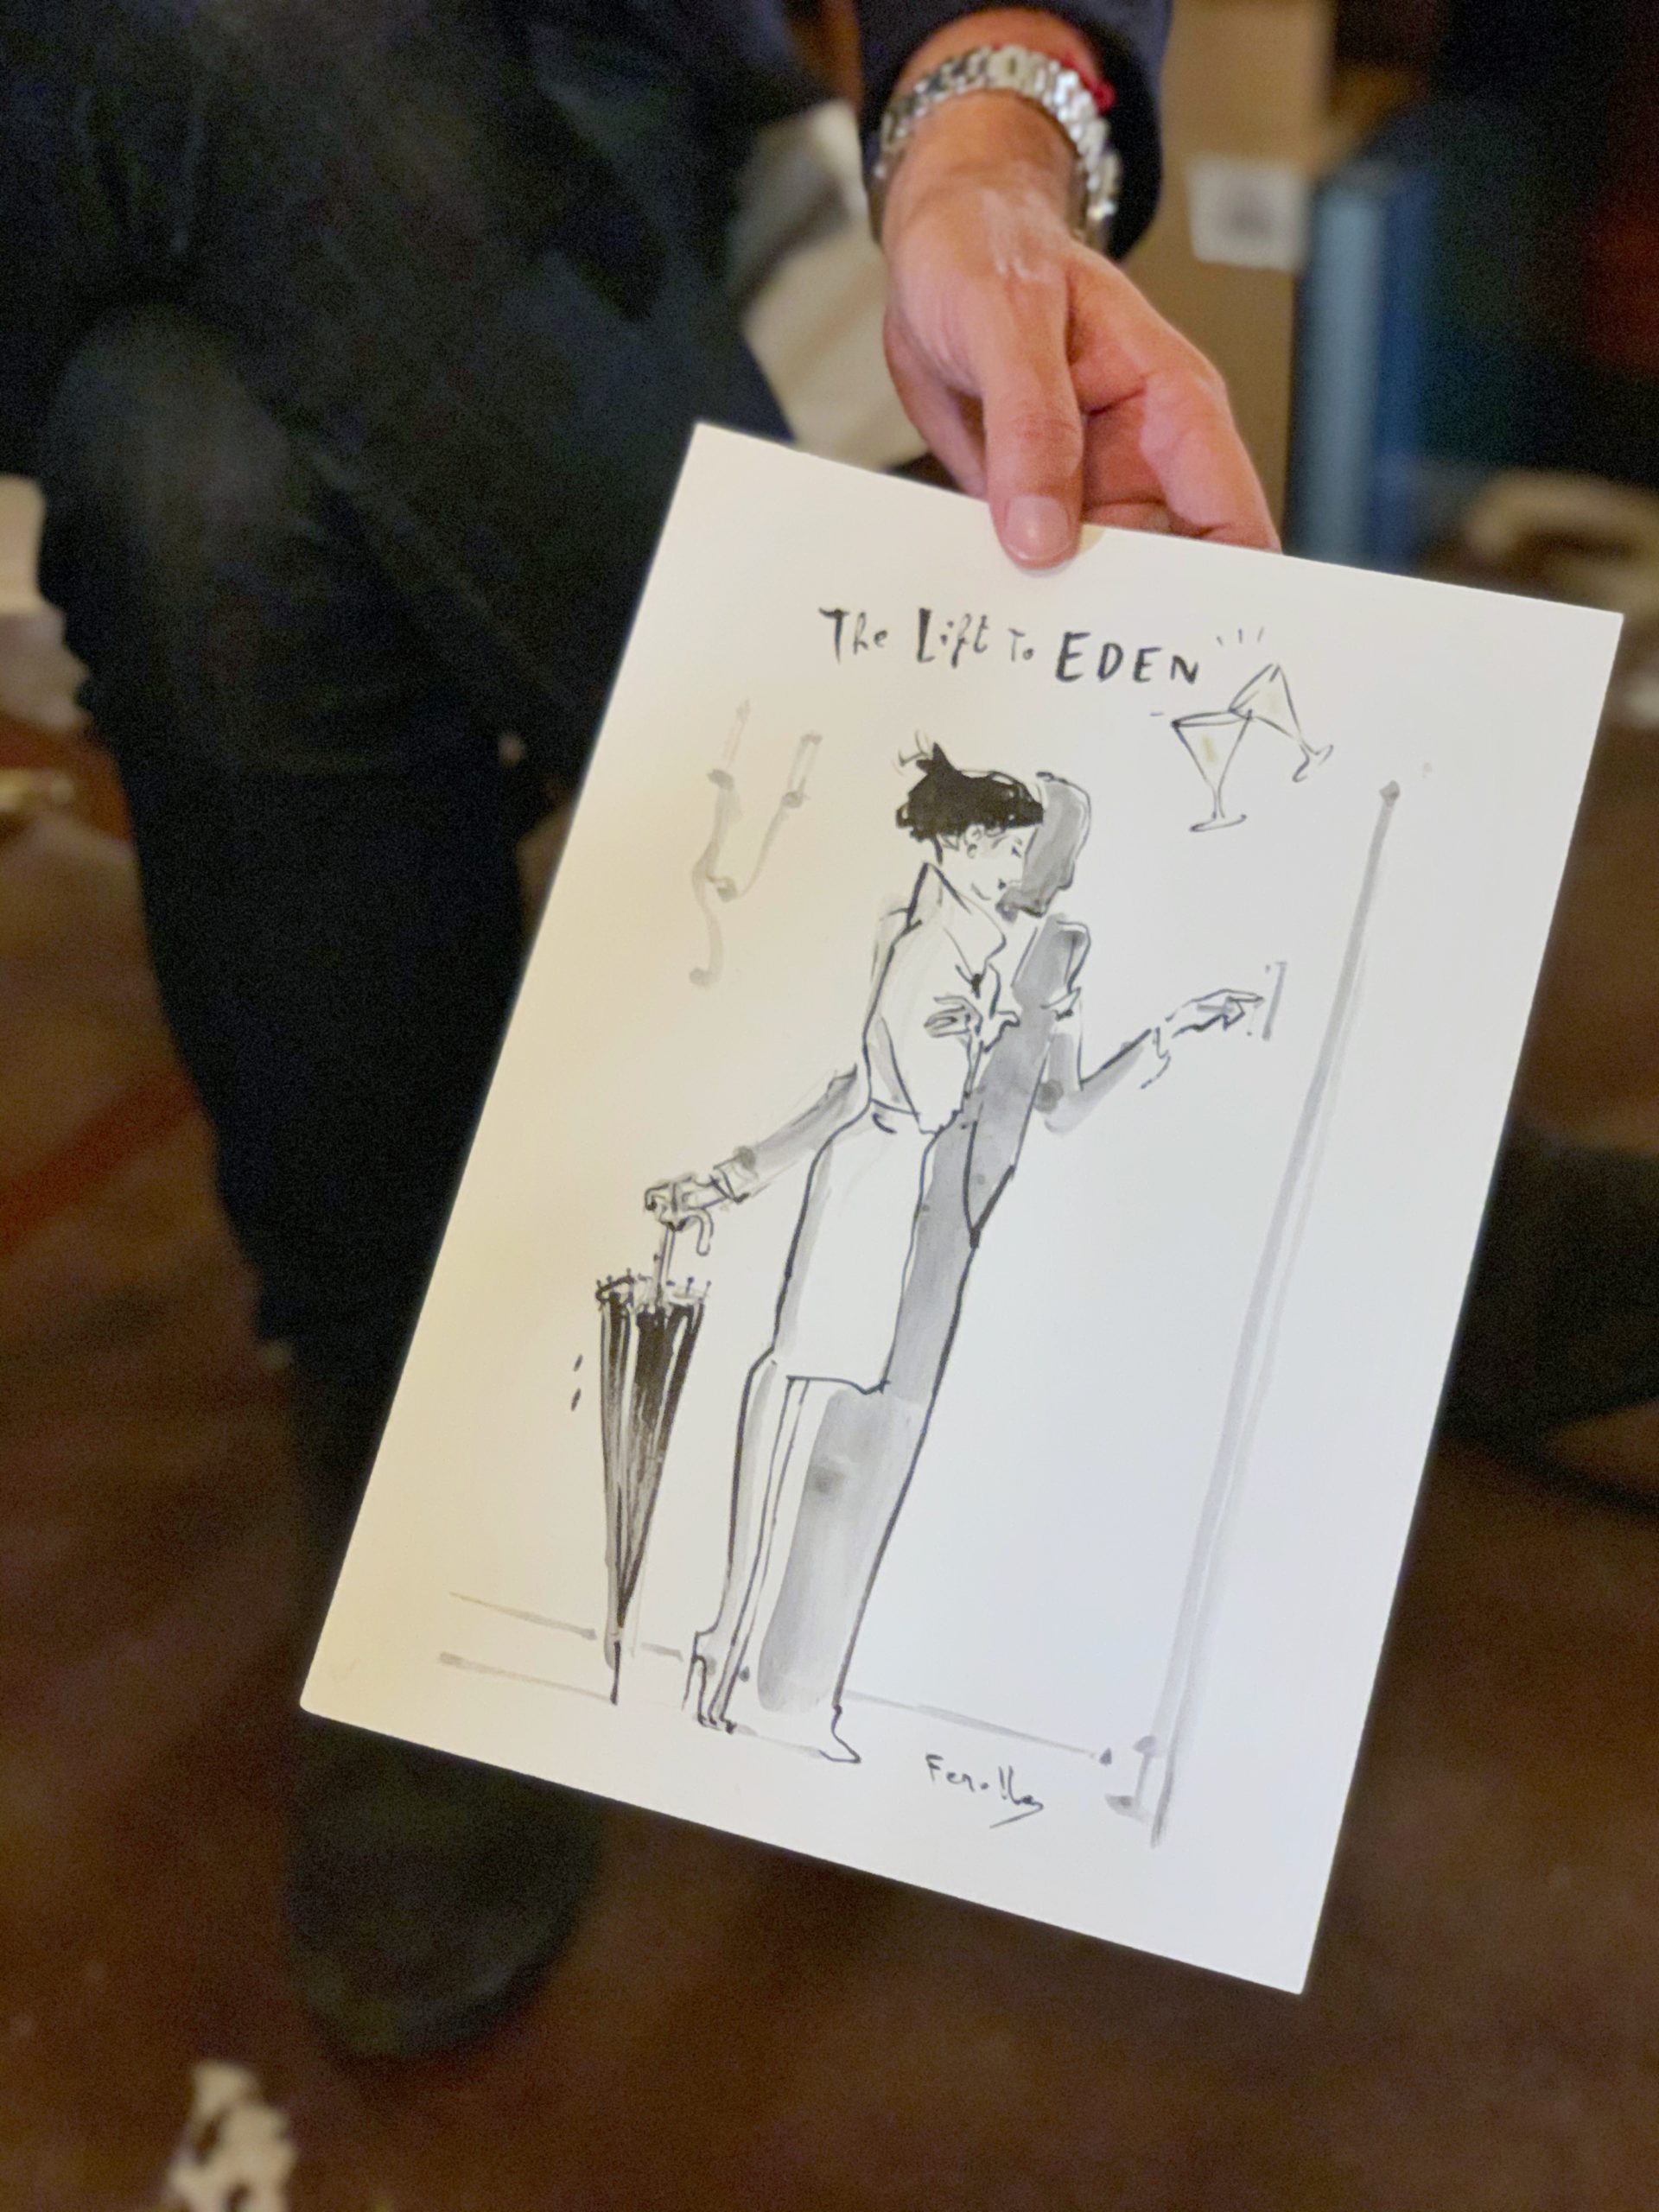 Andrea Ferolla holds one of his drawings from the Hotel Eden.